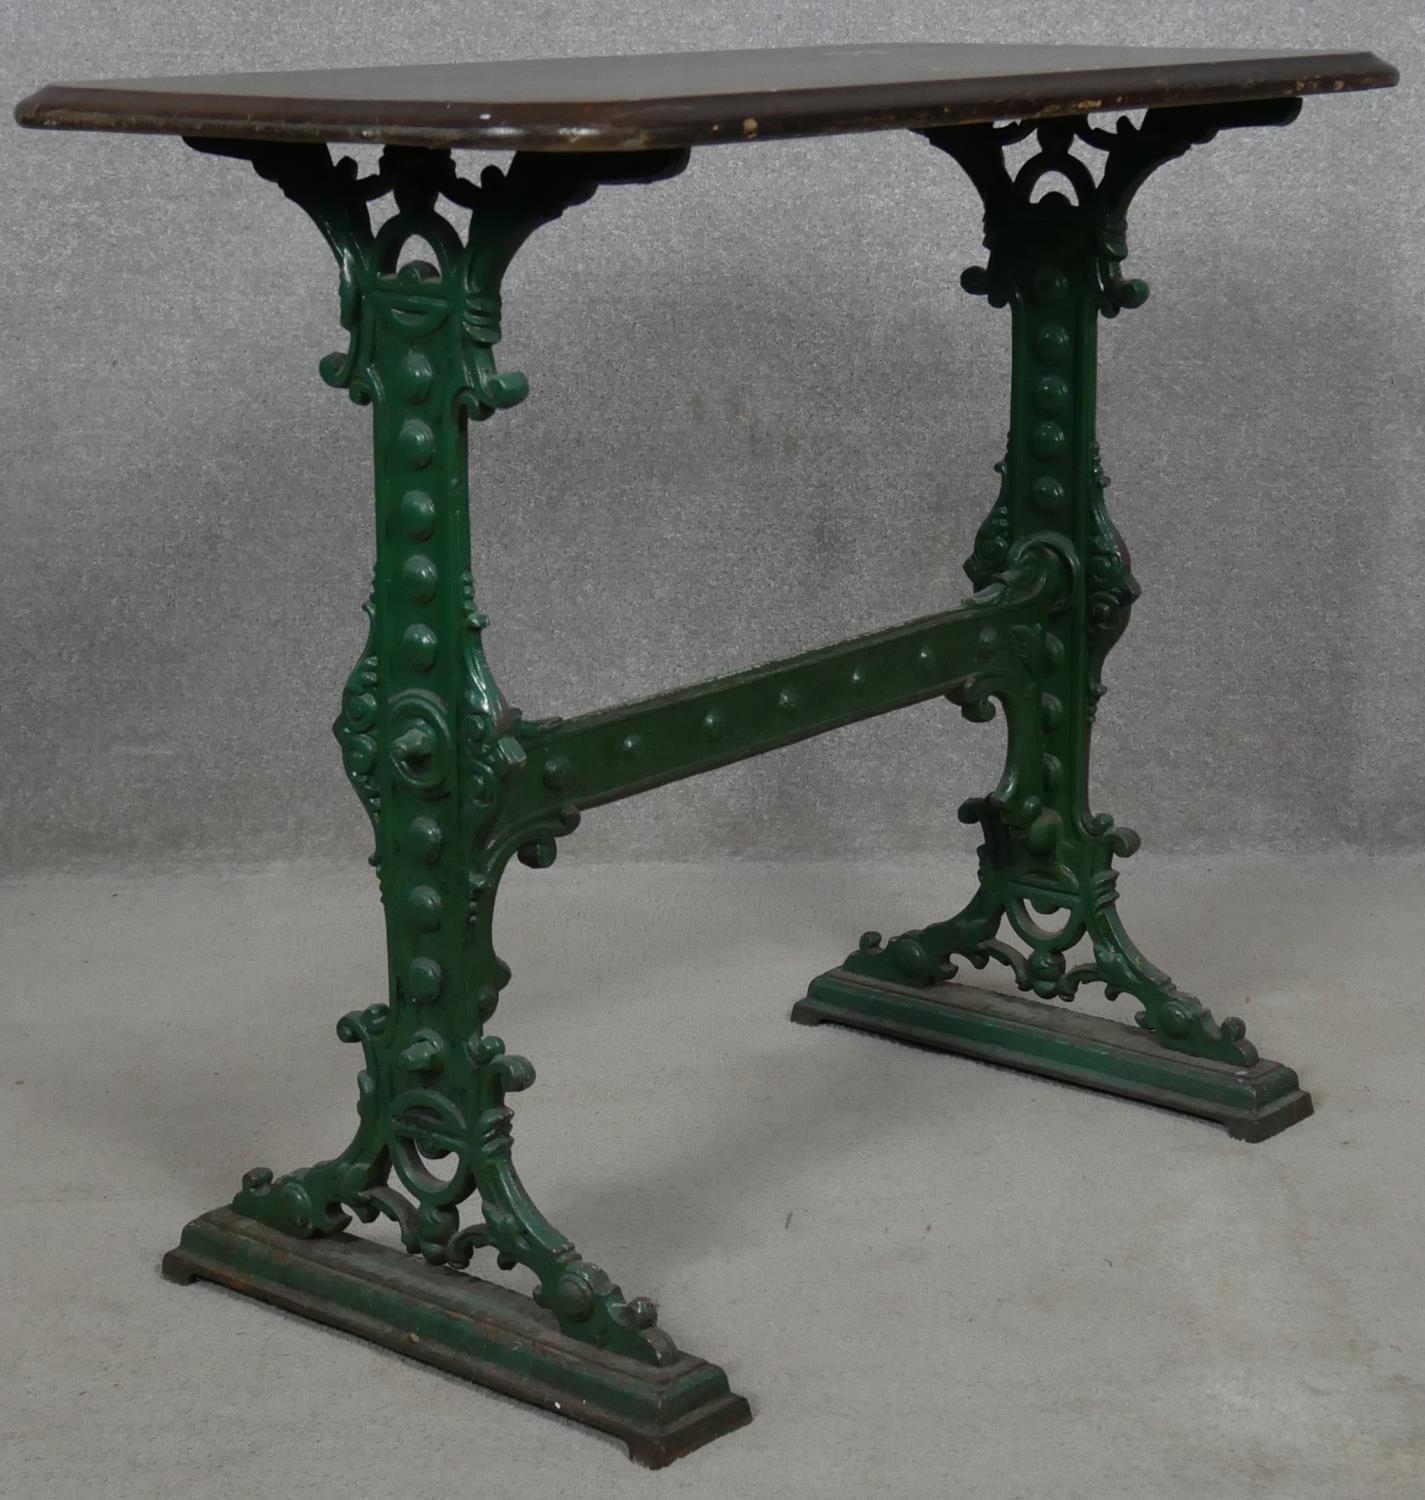 A 19th century cast iron pub table with mahogany top the base marked; Gaskell and Chambers, - Image 2 of 6